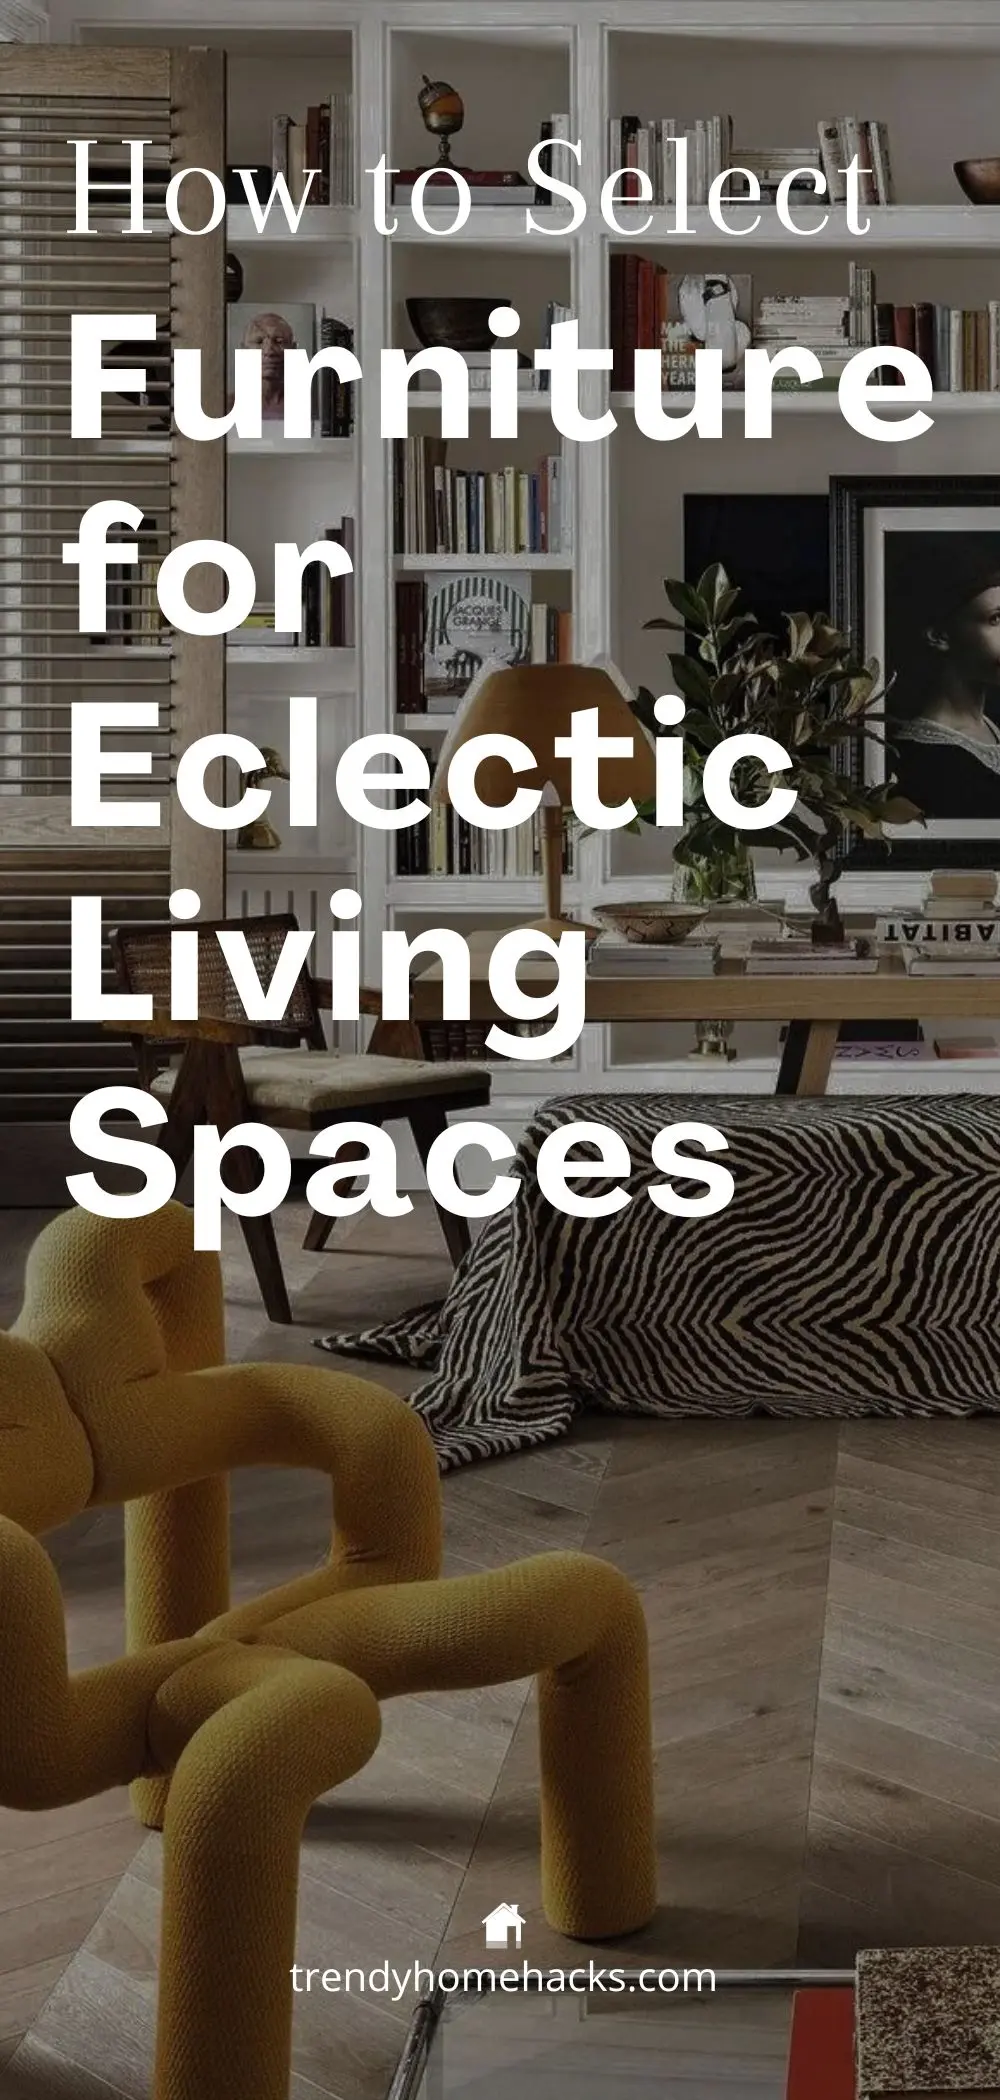 a Pinterest pin with a dark background image of a living room and text overlay "how to select furniture for eclectic living spaces" make it easy to share content on social media.